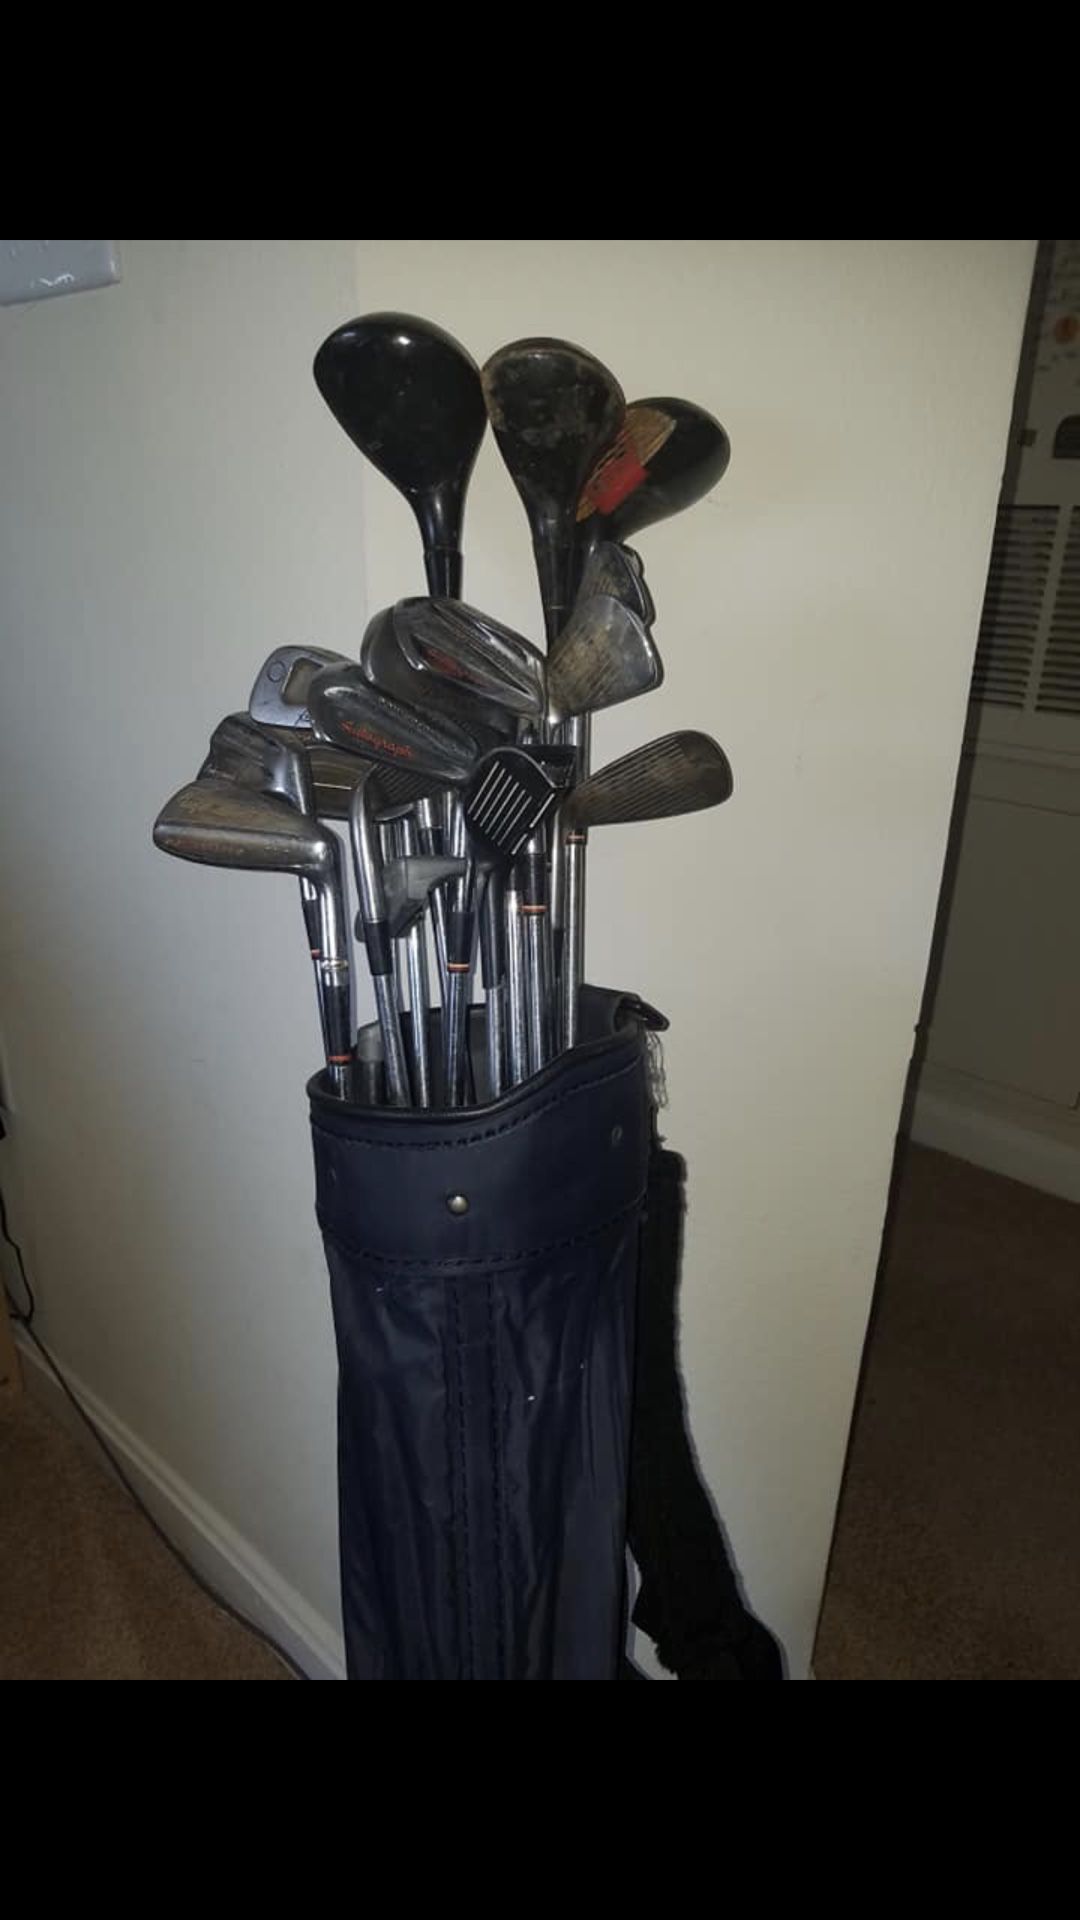 Golf clubs / 19 pieces +bag. All for $30